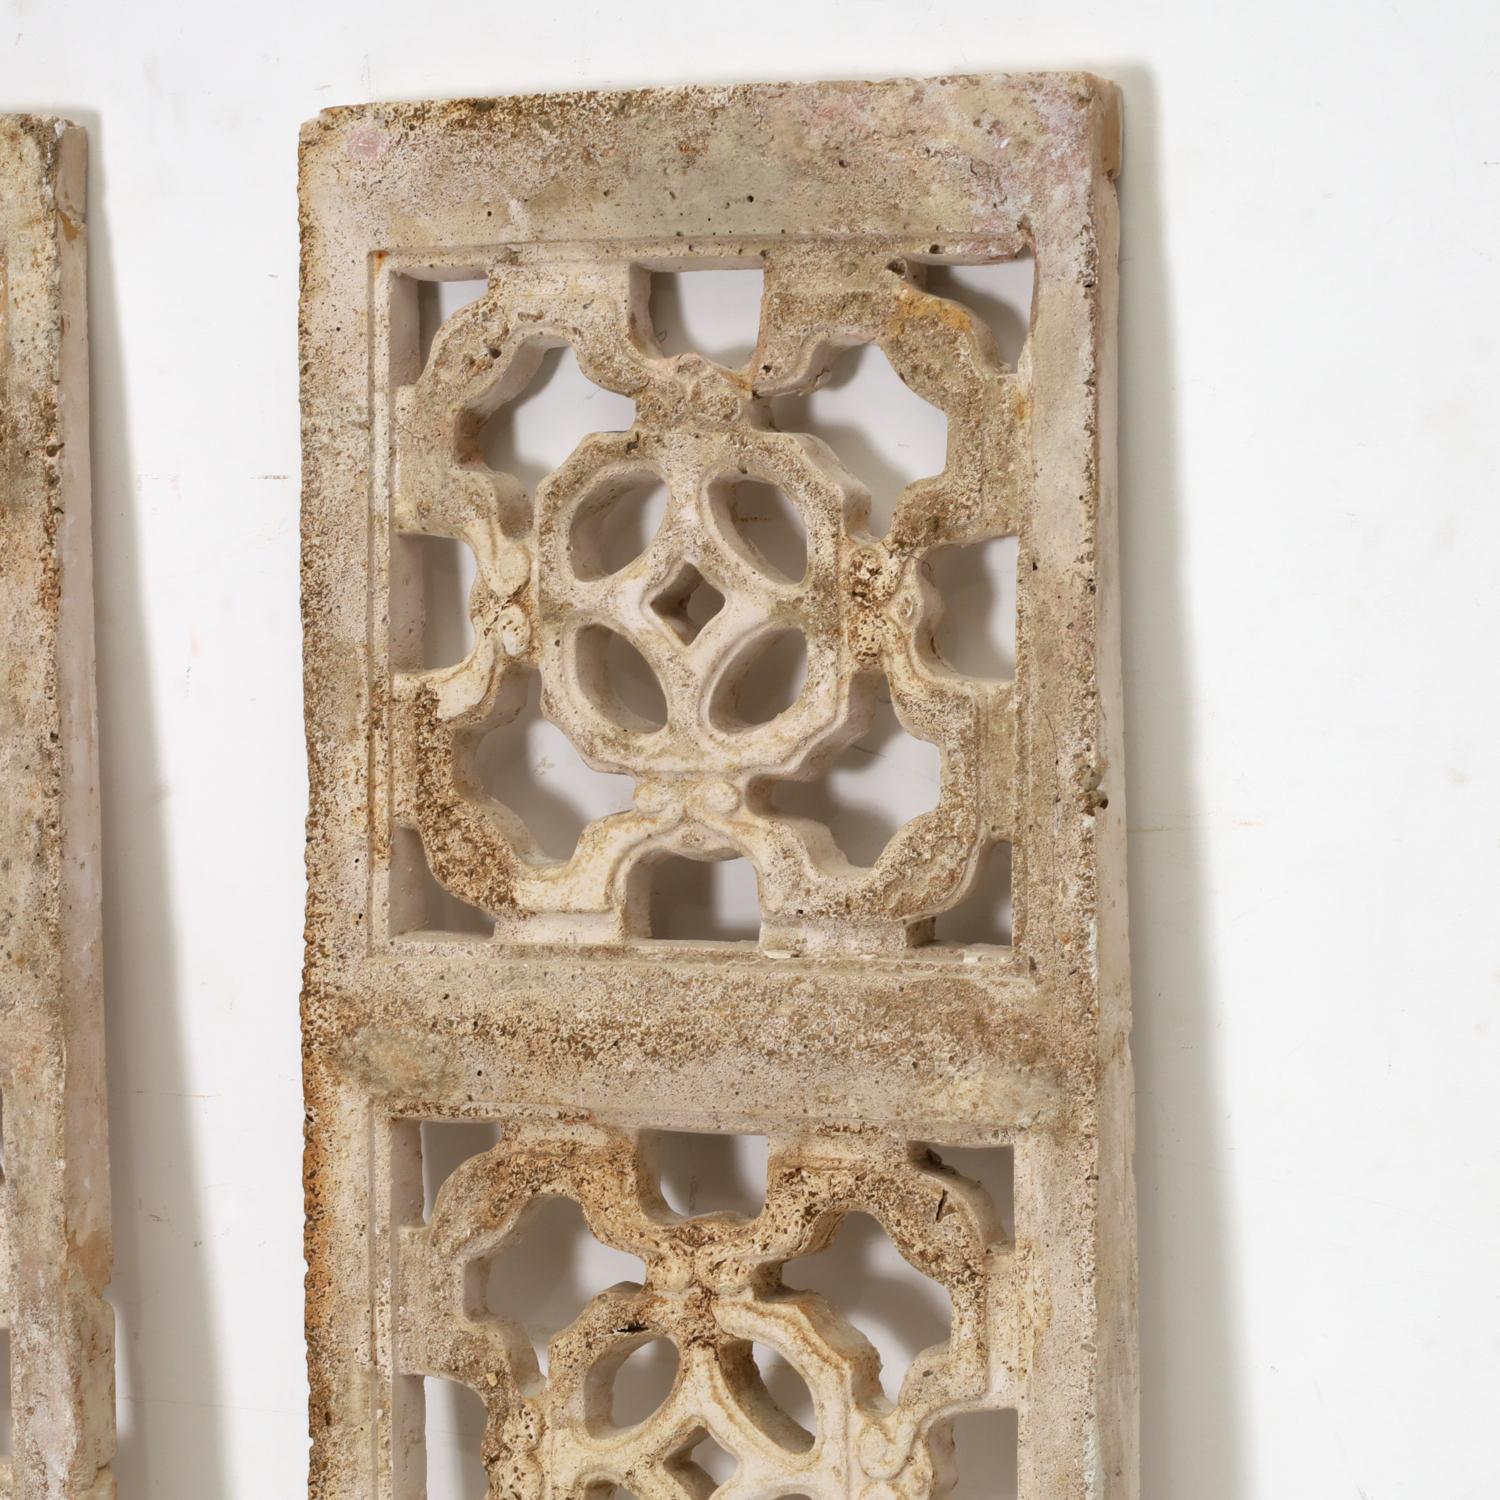 20th C., cast stone panels with attractive patina. The panels could be used outdoors or for interior decoration. The back side of the panels have metal wall mounts.

Dimensions:
66.5